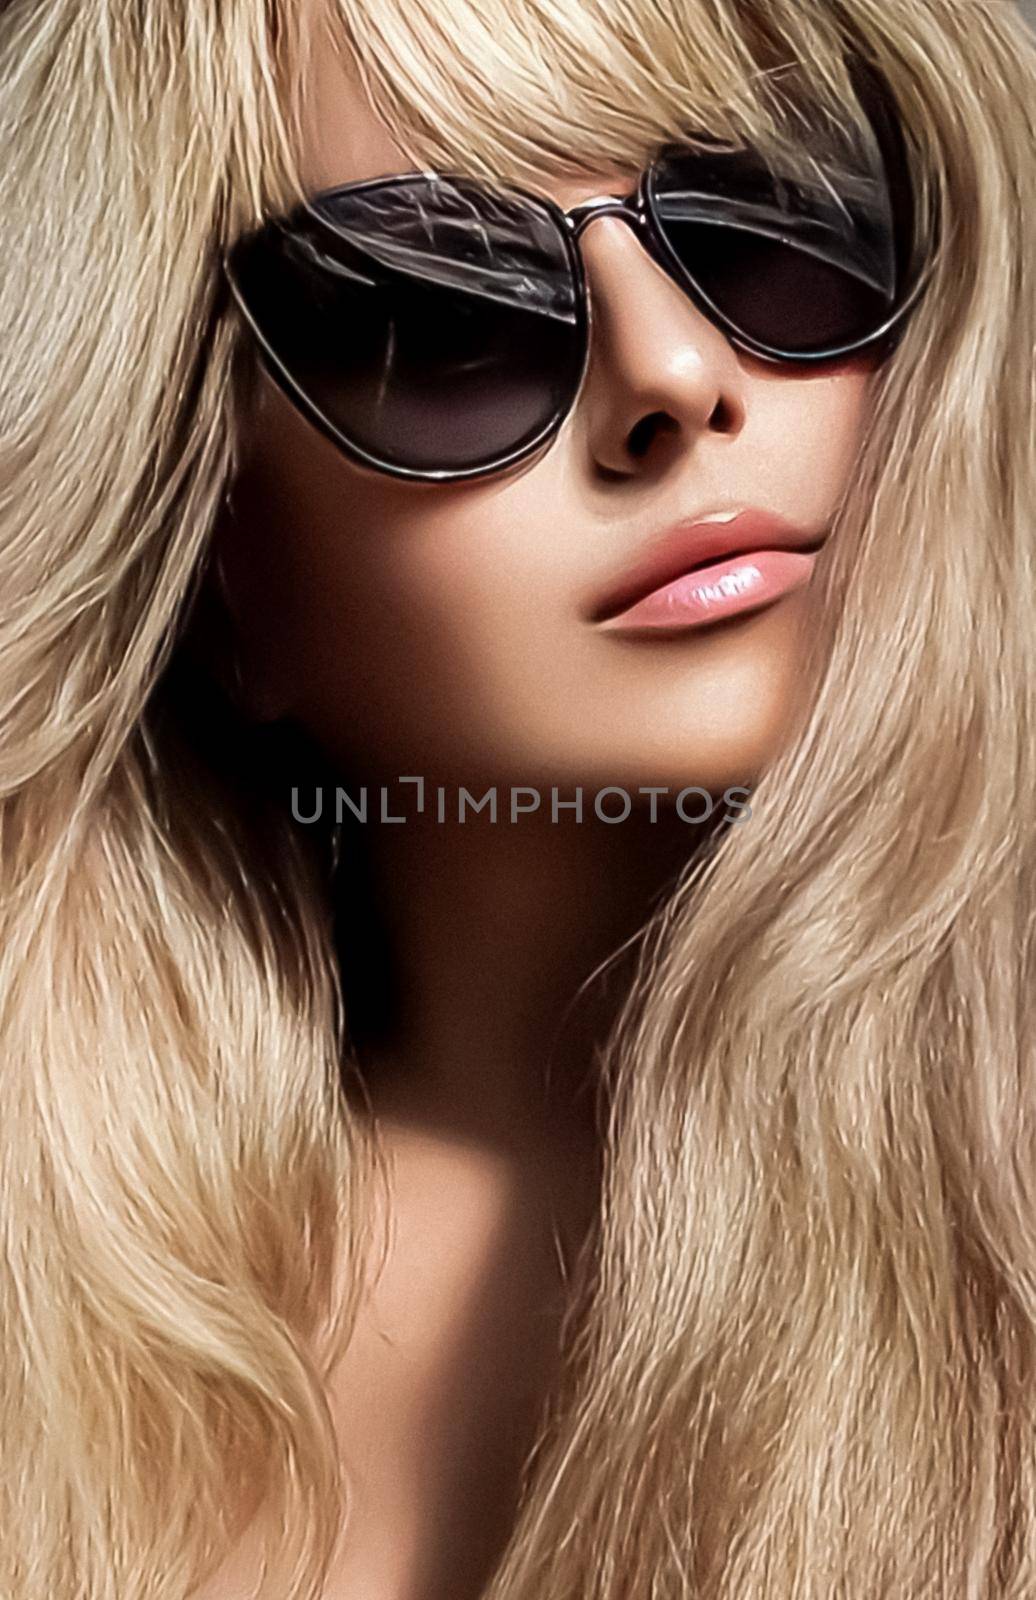 Luxury fashion, blonde hairstyle and accessories, beauty face portrait of a woman with long blond hair, wearing chic sunglasses, glamour style by Anneleven